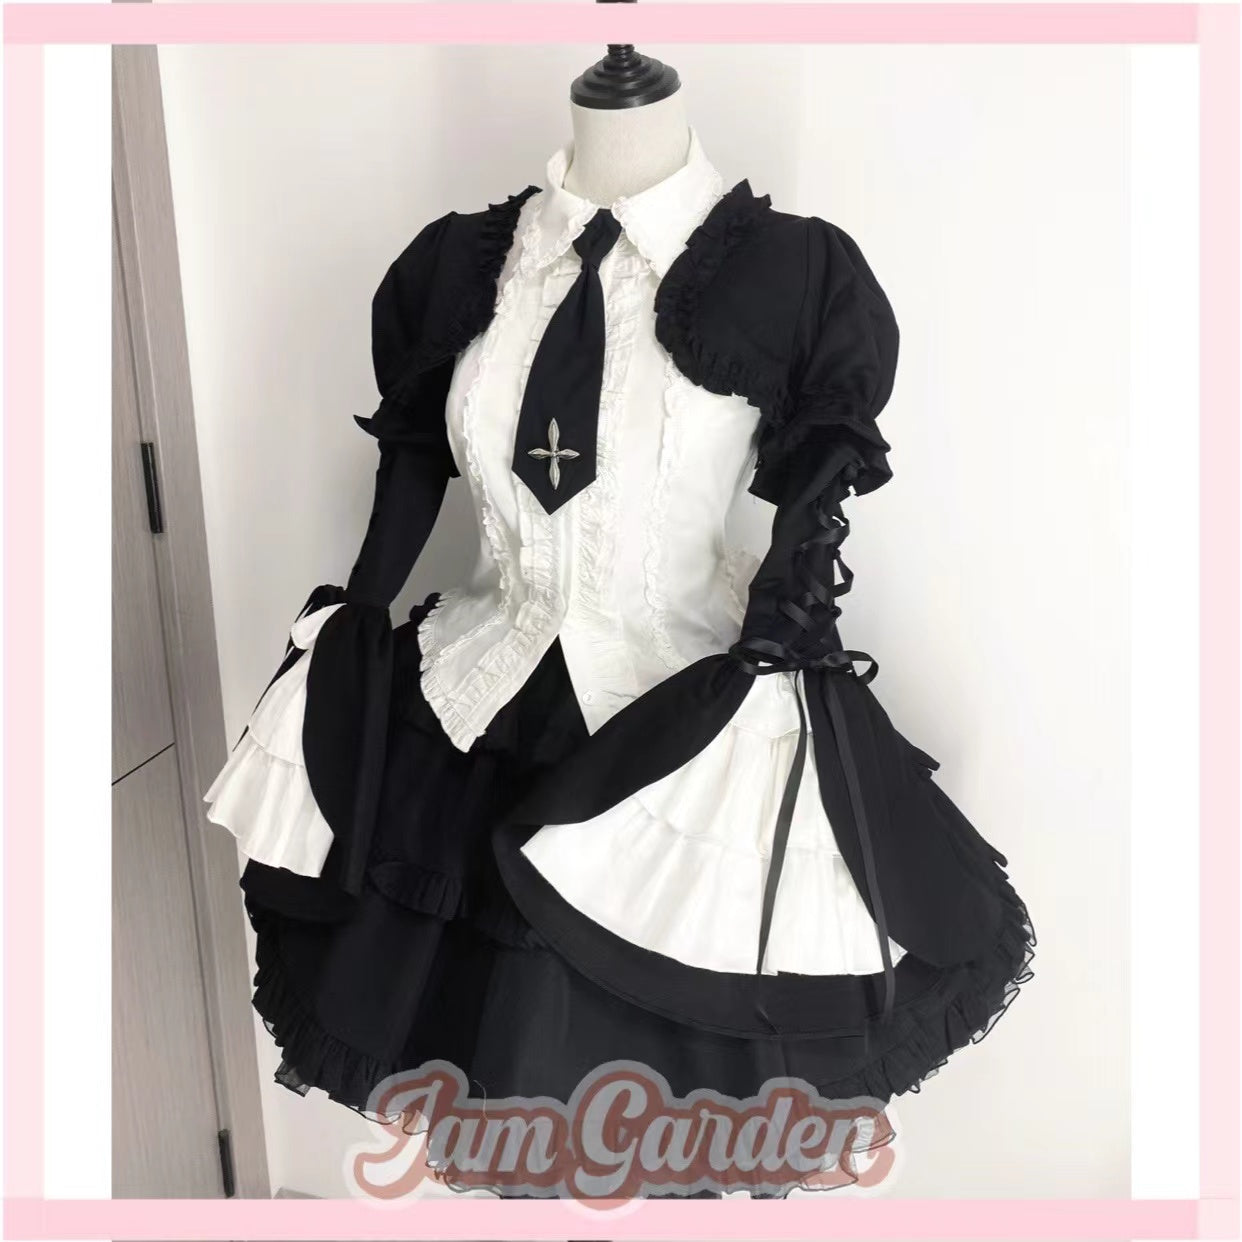 Subculture Original Black and White Rabbit Ears Puff Skirt Cute Punk Hot Girl Lace